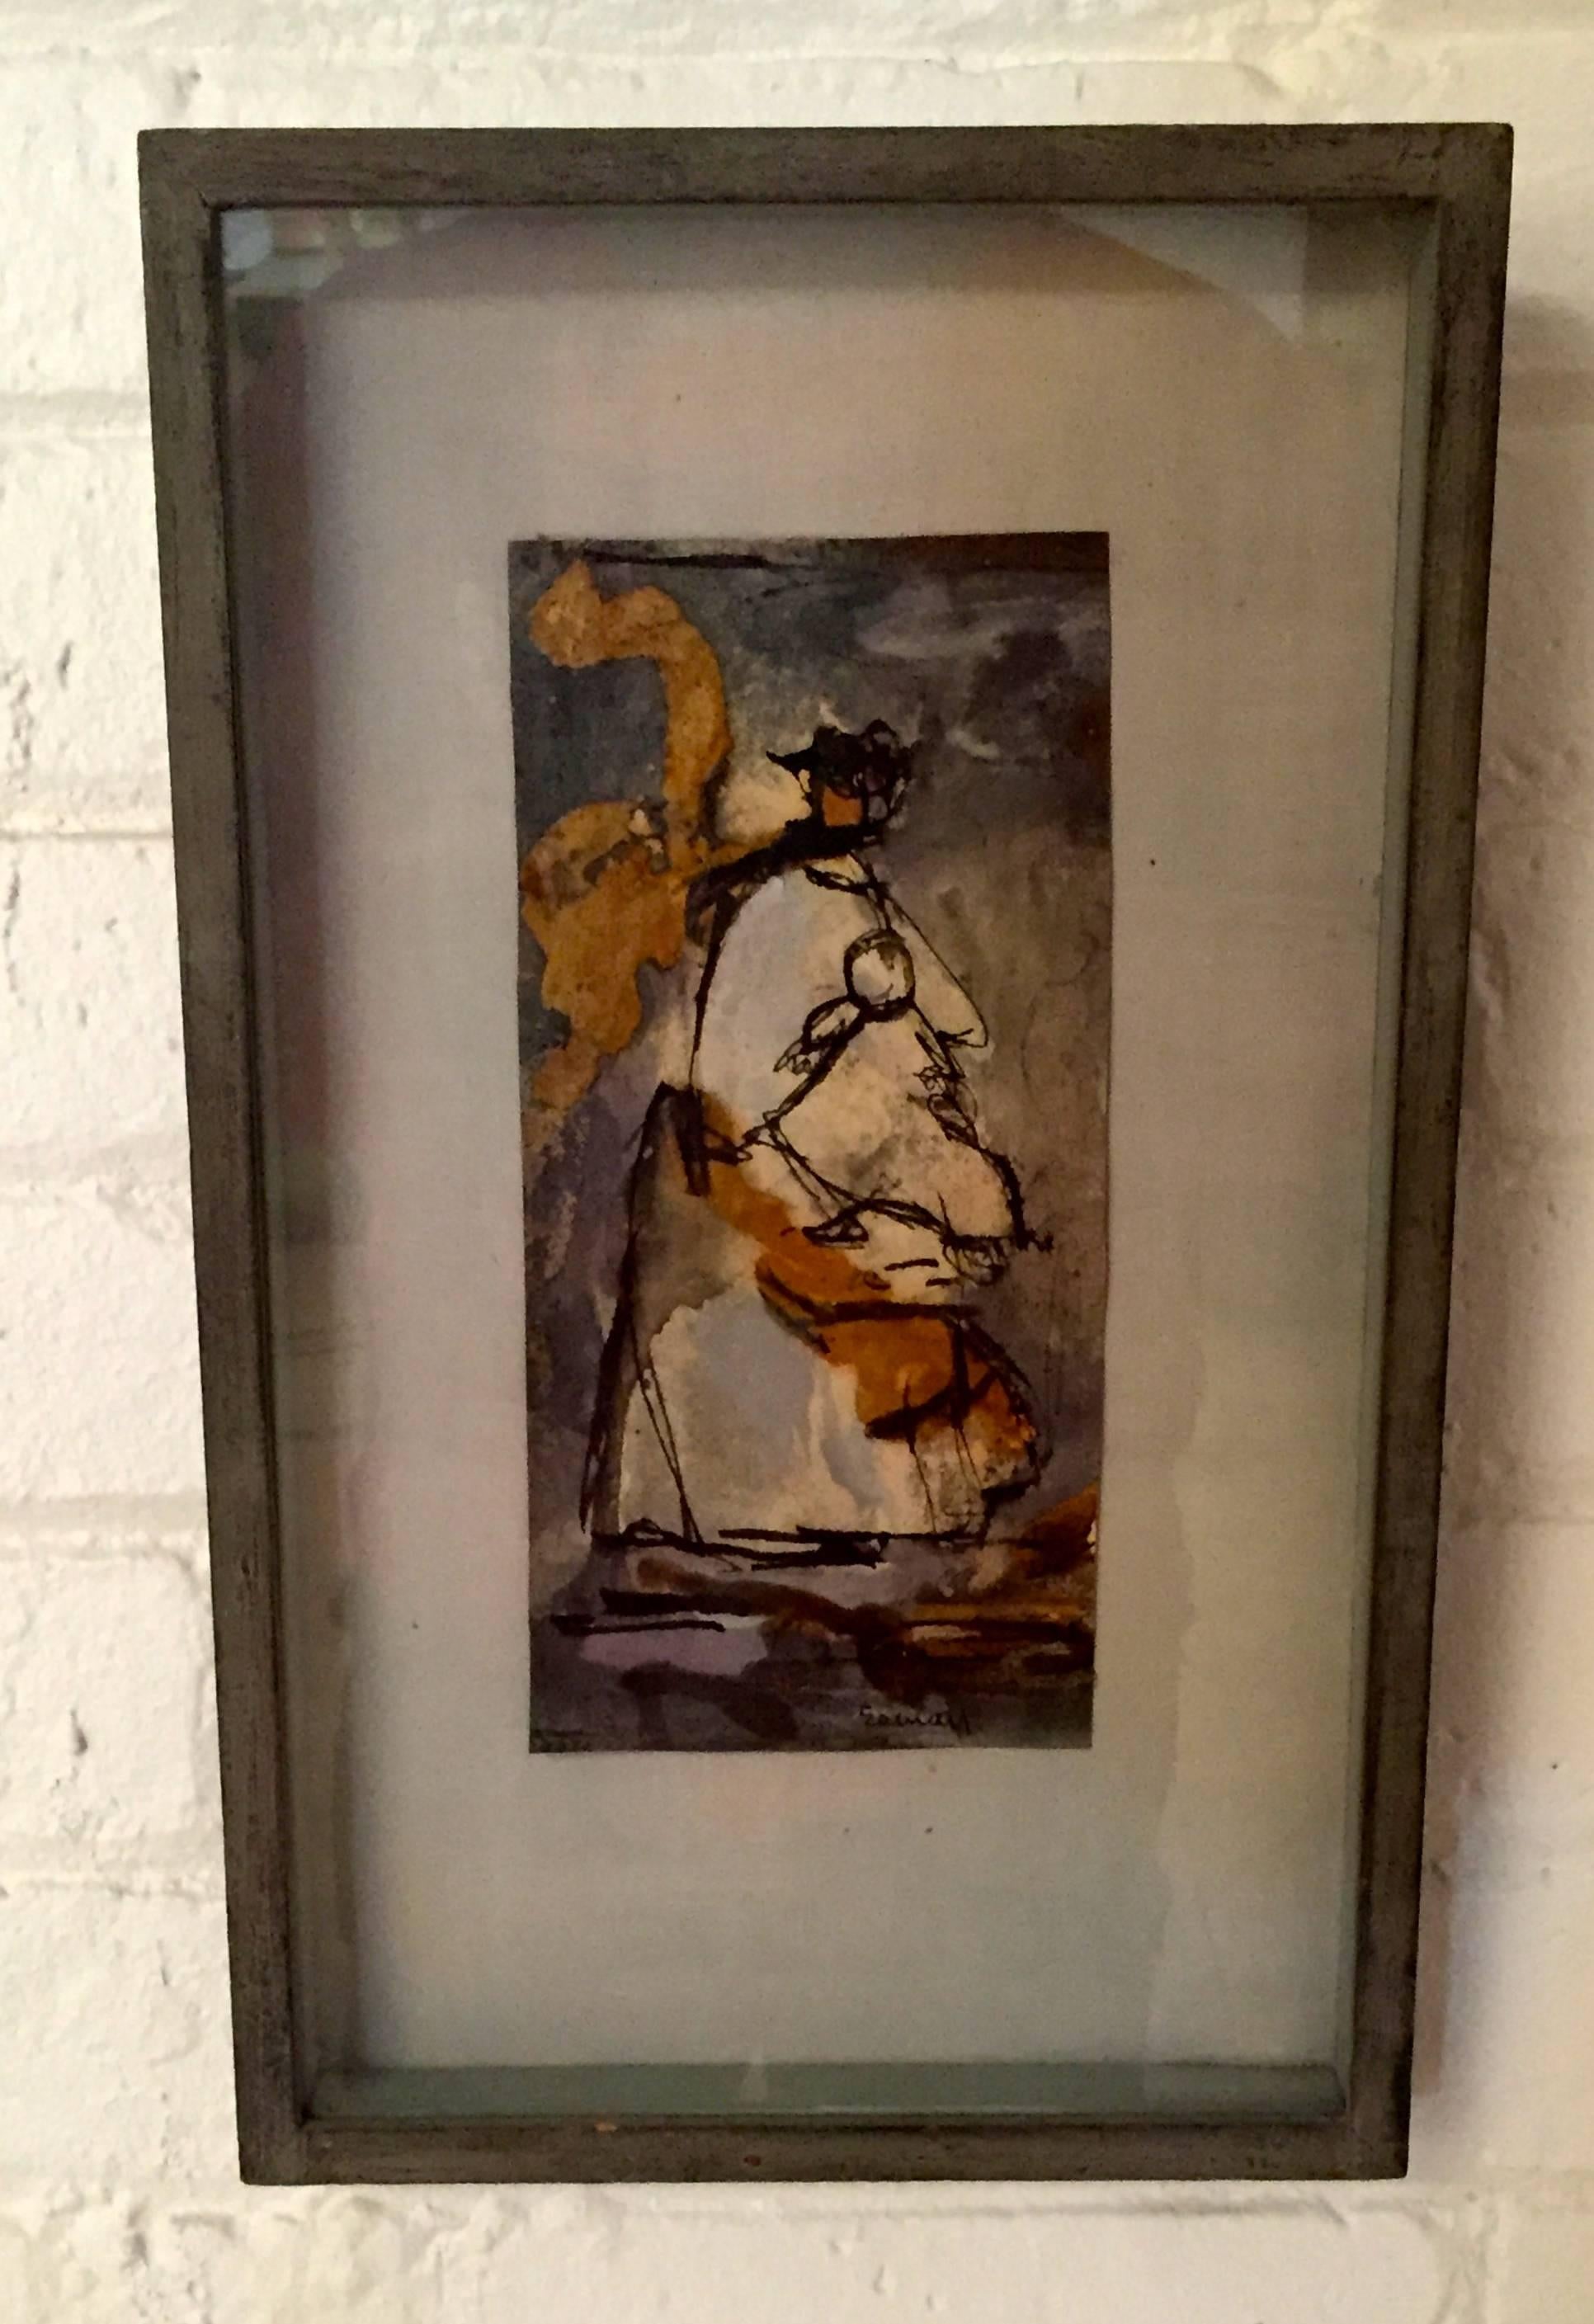 Listed artist Betty Esman watercolor entitled, Mother and Child, circa 1956. Skillfully rendered expressive modernist watercolor. Signed lower right, Esman and inscribed verso. Floated in a shadow box frame. 

Overall dimensions are 8.75